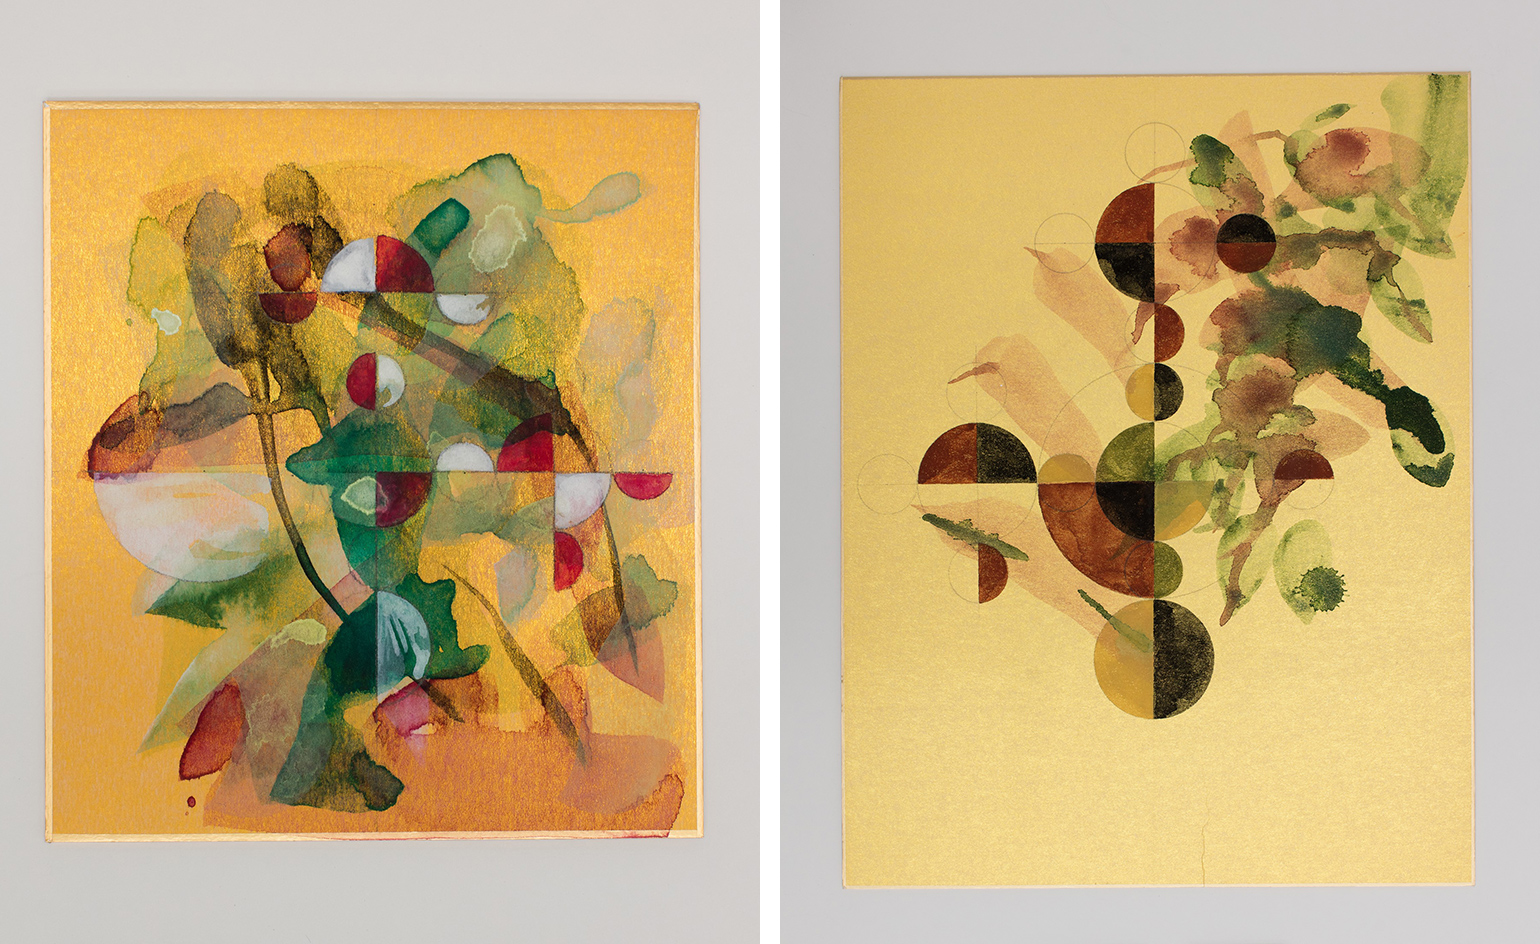 Gabriel Orozco's watercolors on view in Hong Kong. Left: Suisai I, 2016. Right: Suisai III, 2016. Image courtesy of Wallpaper.